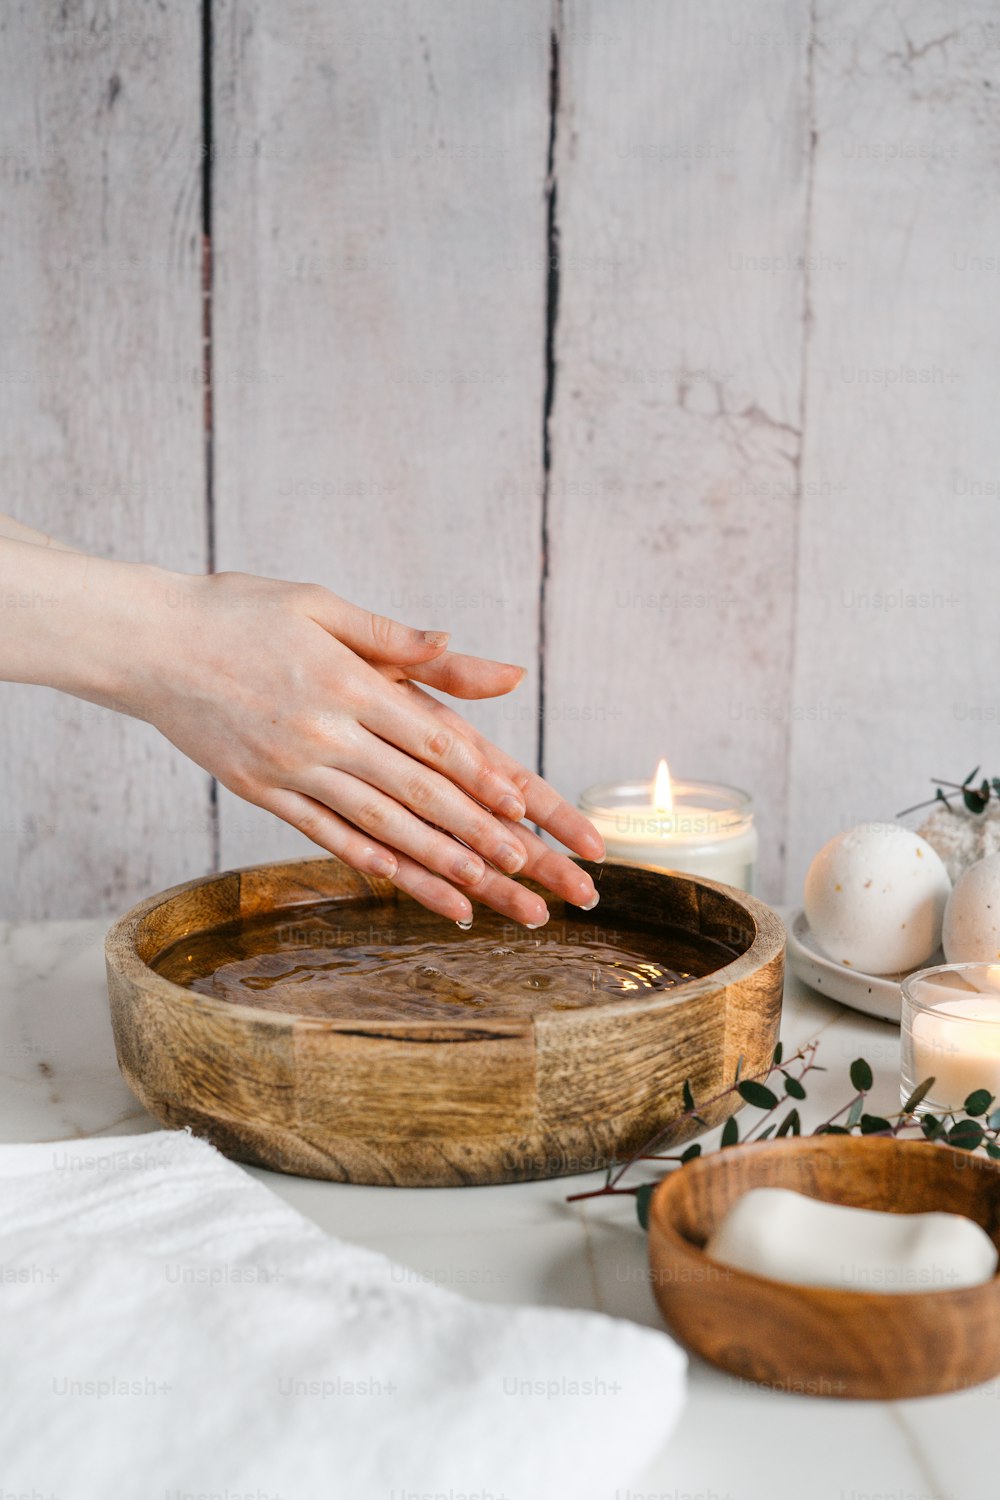 a person reaching for a candle in a wooden bowl